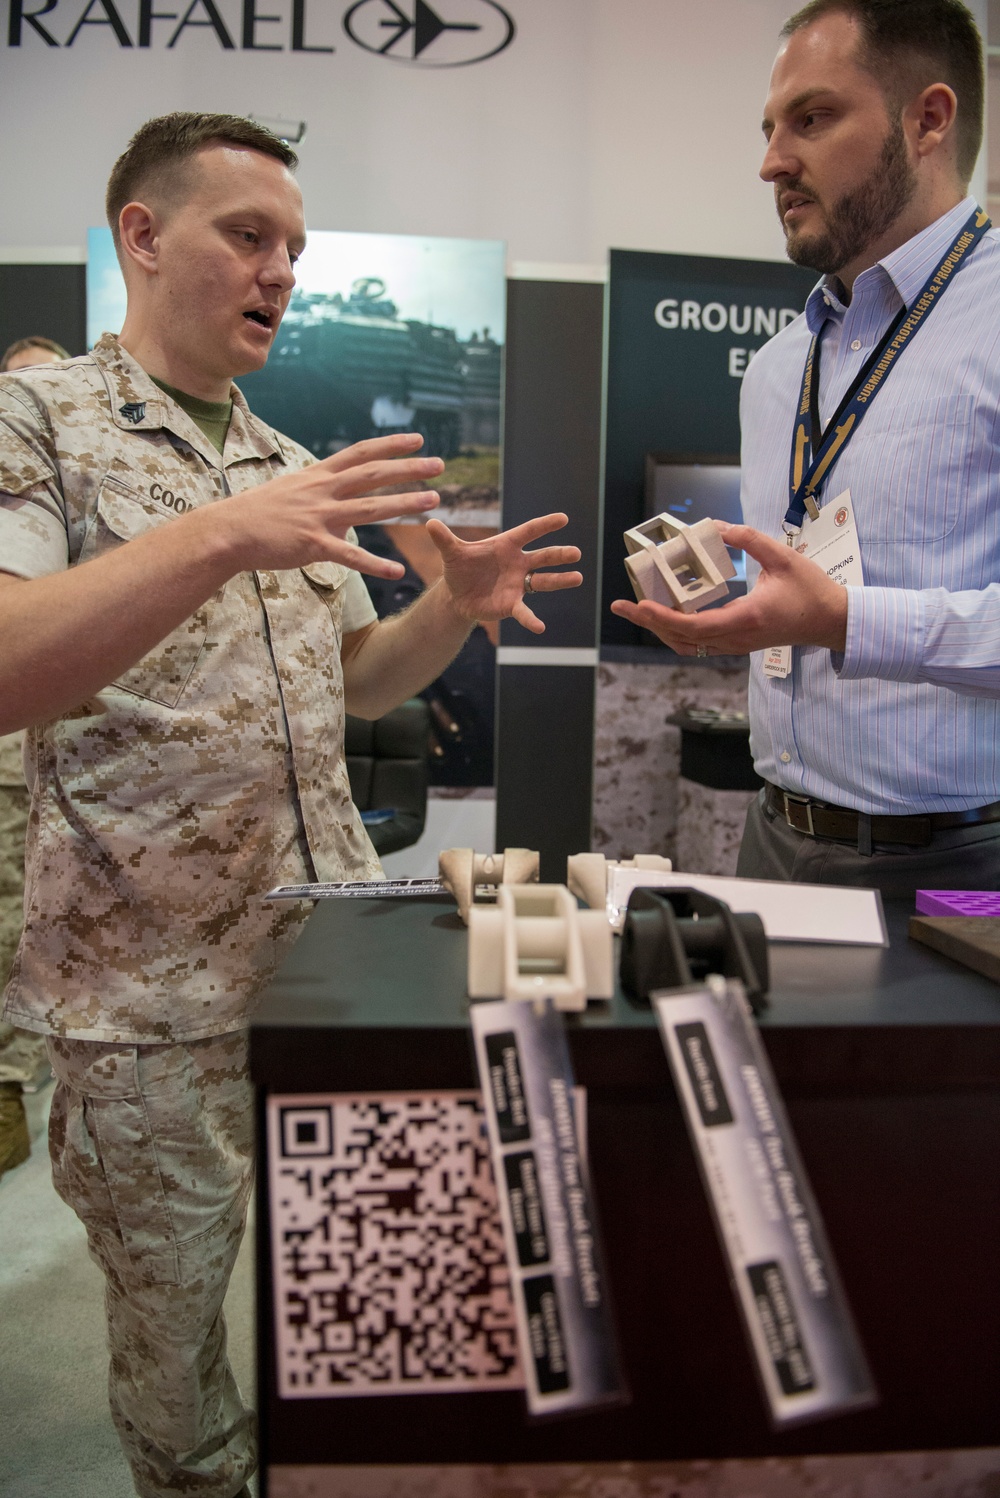 Carderock AM Team demonstrates at Modern Day Marine Expo